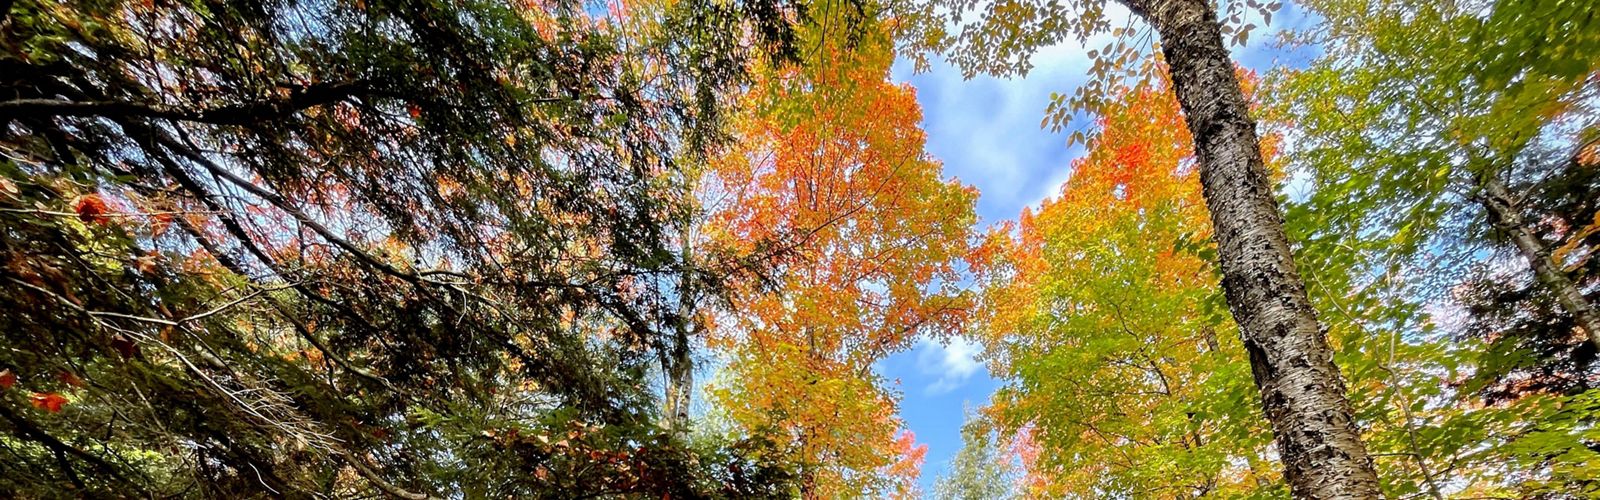 A forest of tall trees with brightly colored leaves.